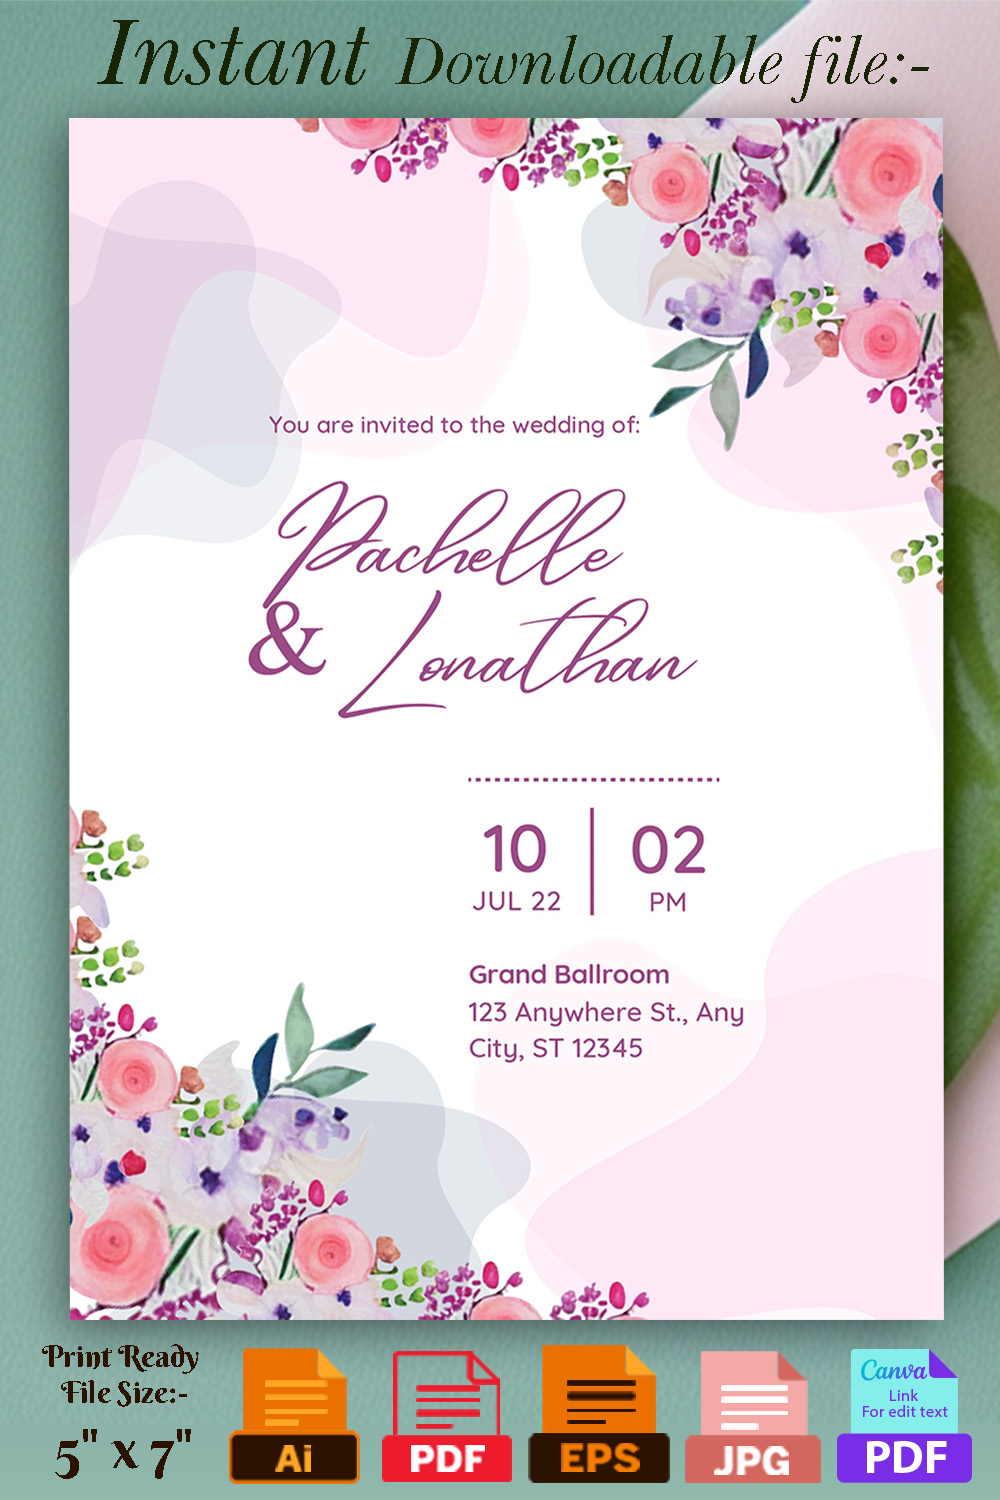 Image with colorful wedding invitation card with flowers.